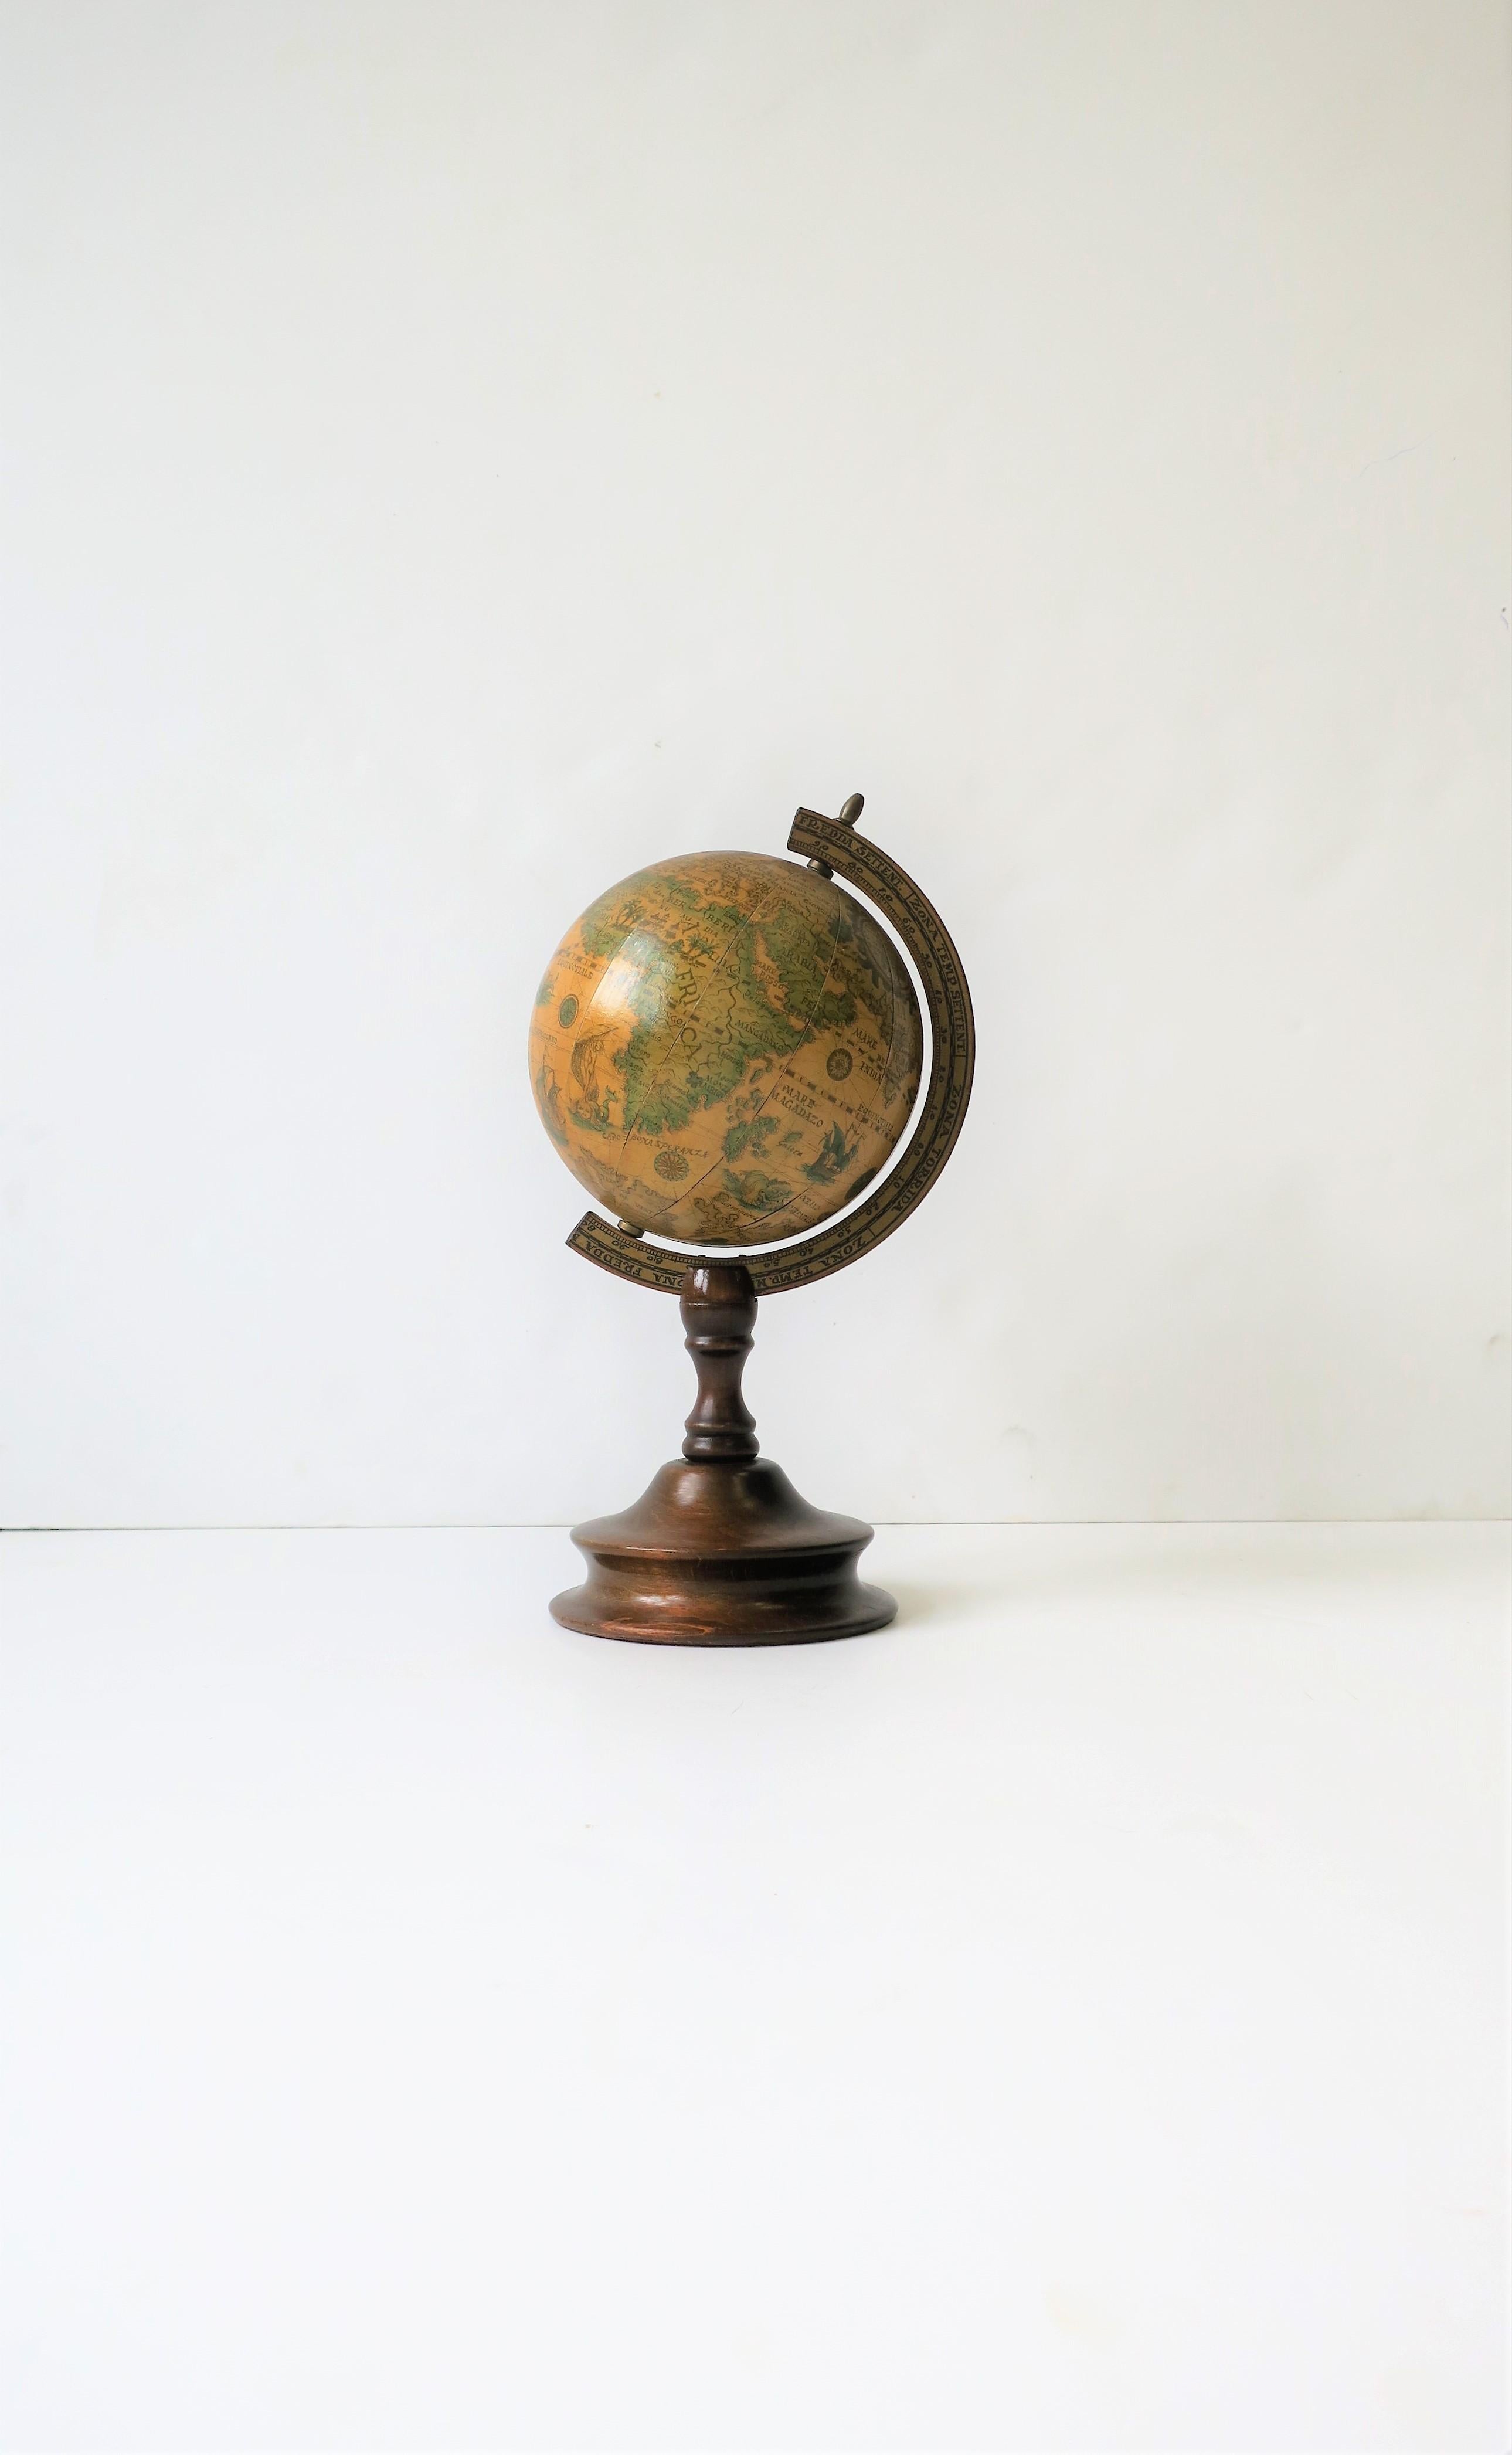 A mid-20th century world globe that spins. Piece has a wood frame with brass hardware. A great decorative object for a bookshelf, étagère, desk, office, etc. Measures: 6